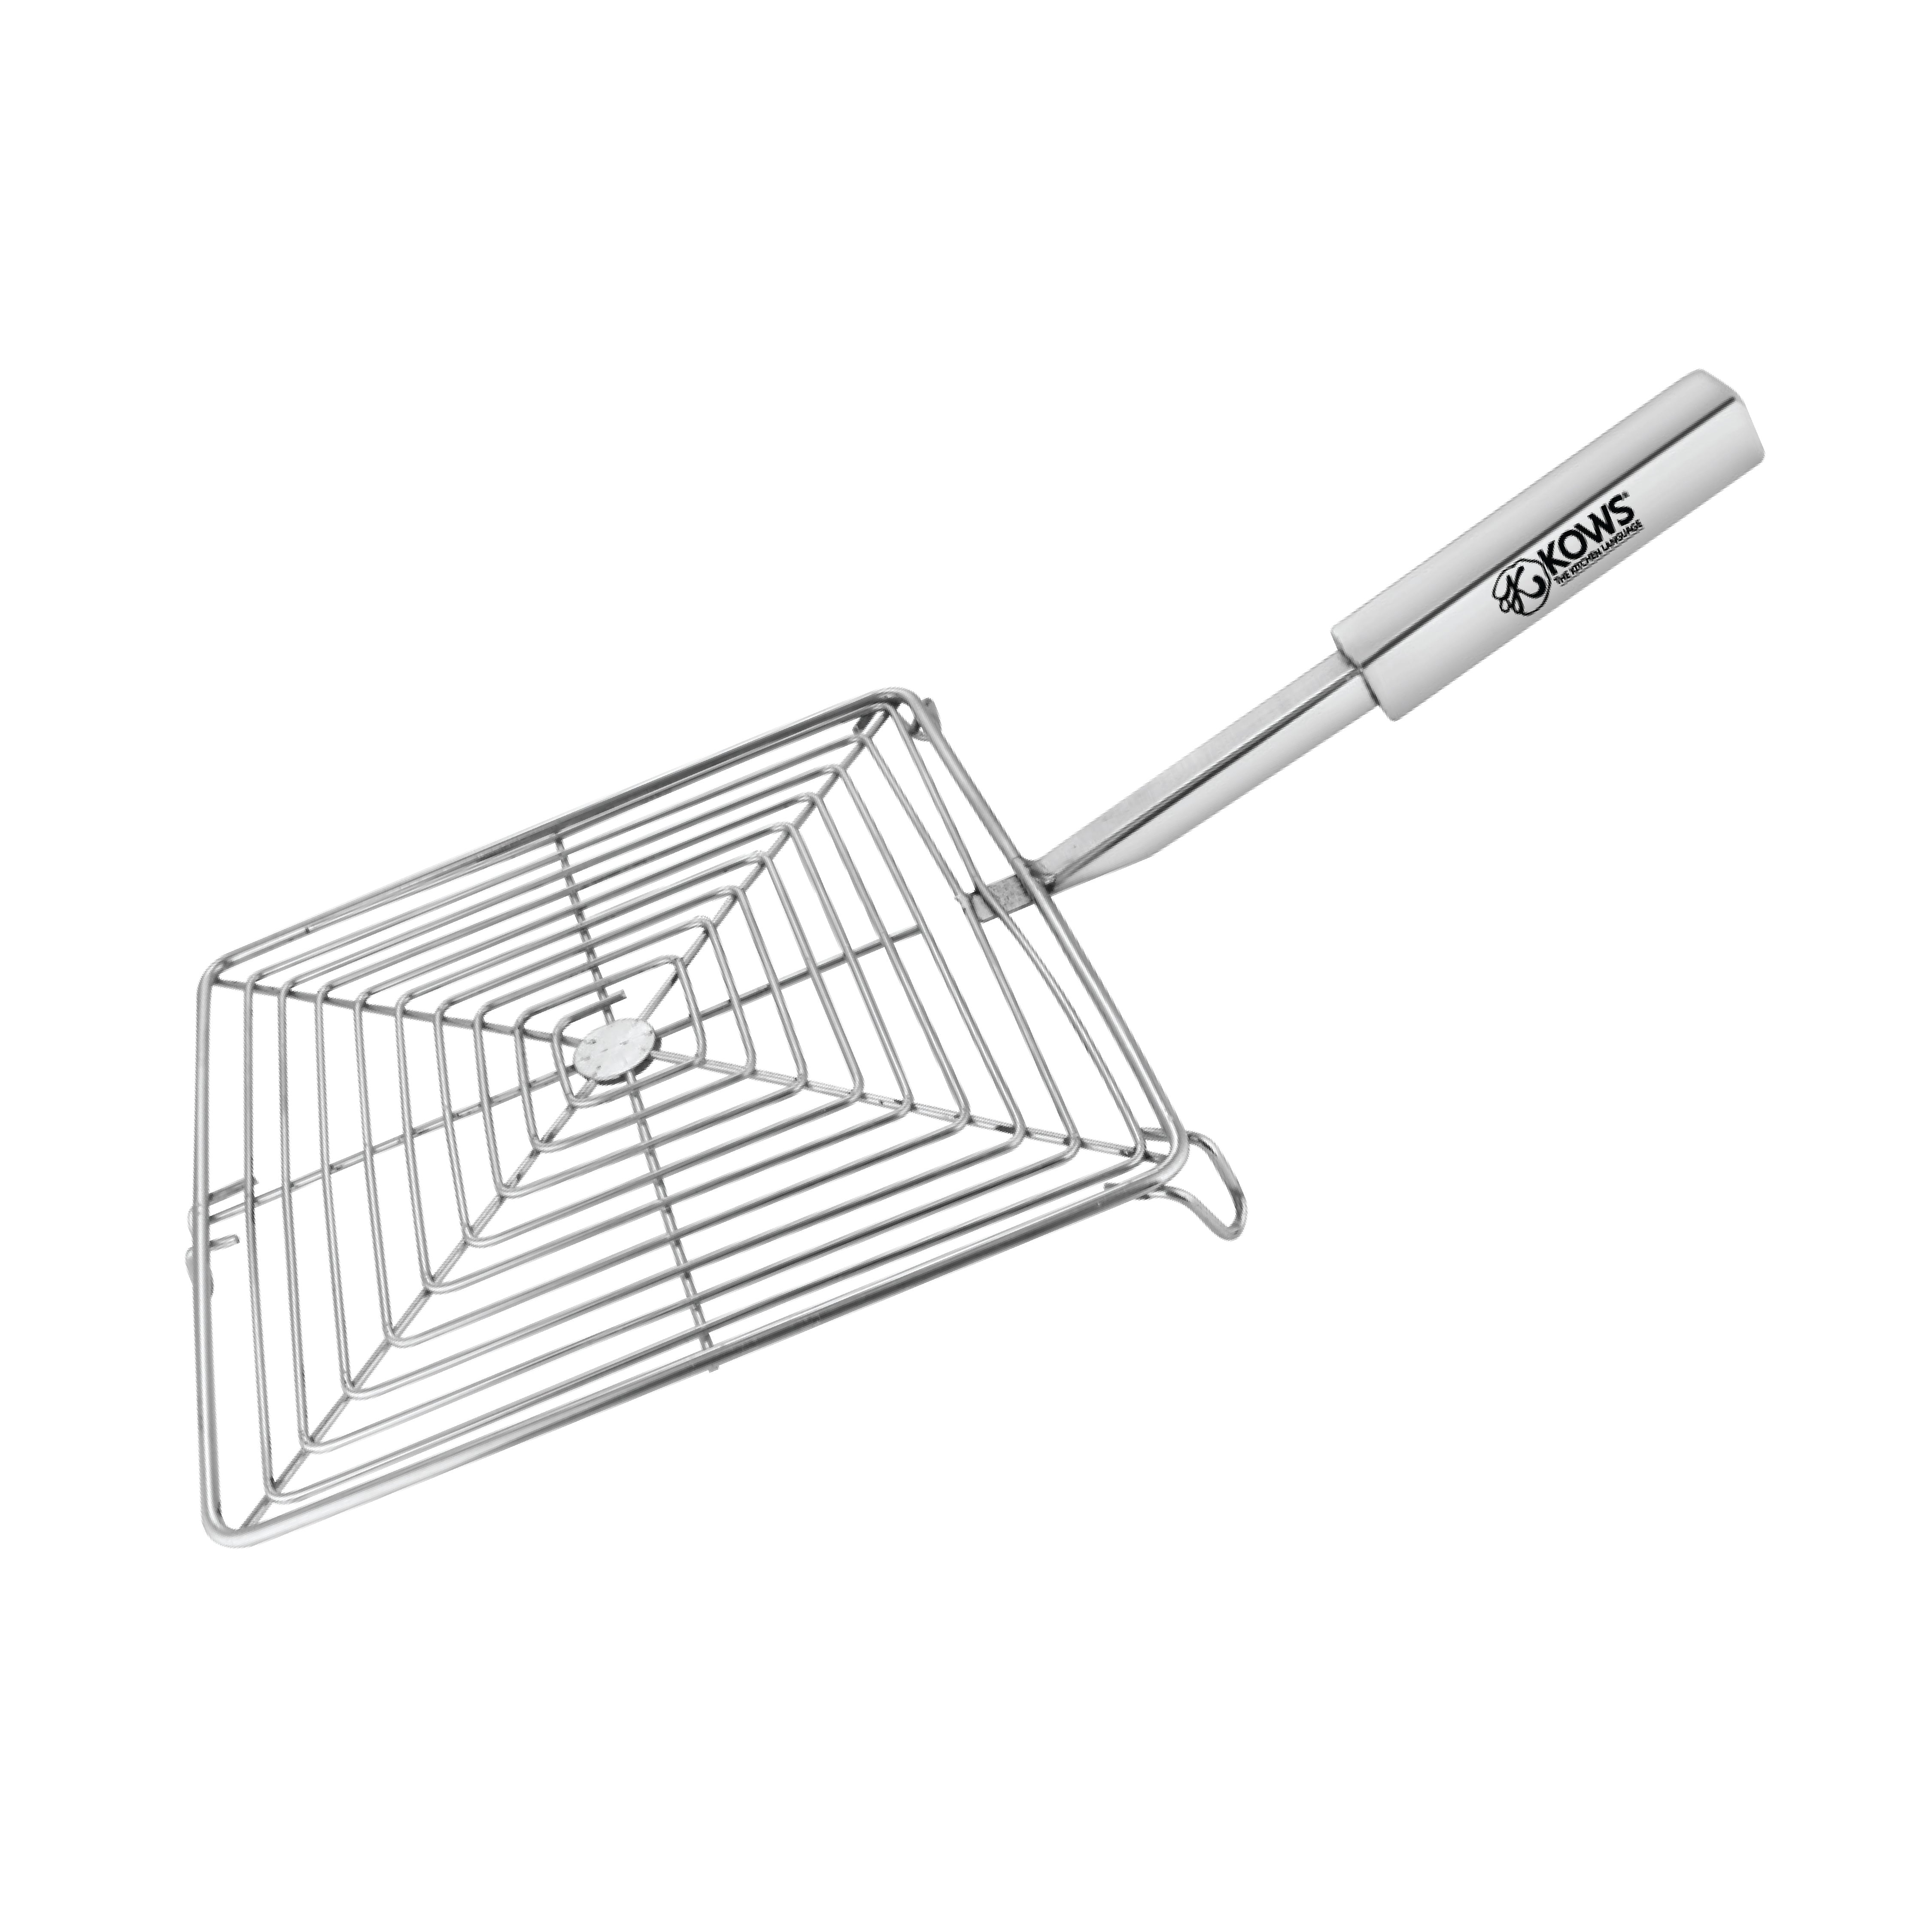 KOWS Heavy square roaster (square pipe handle) (RST10)